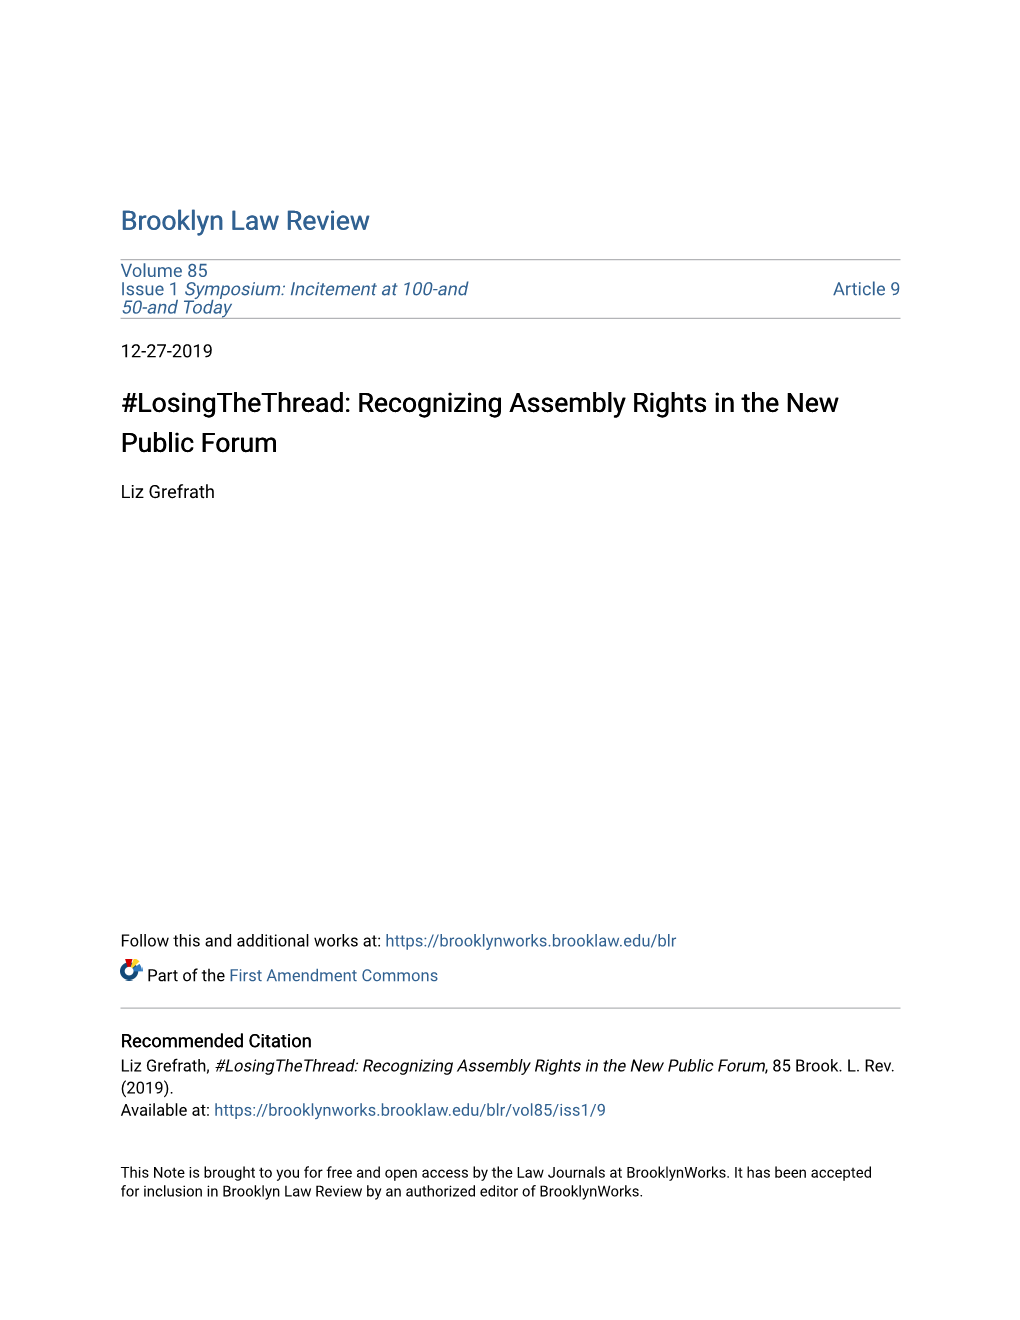 Recognizing Assembly Rights in the New Public Forum